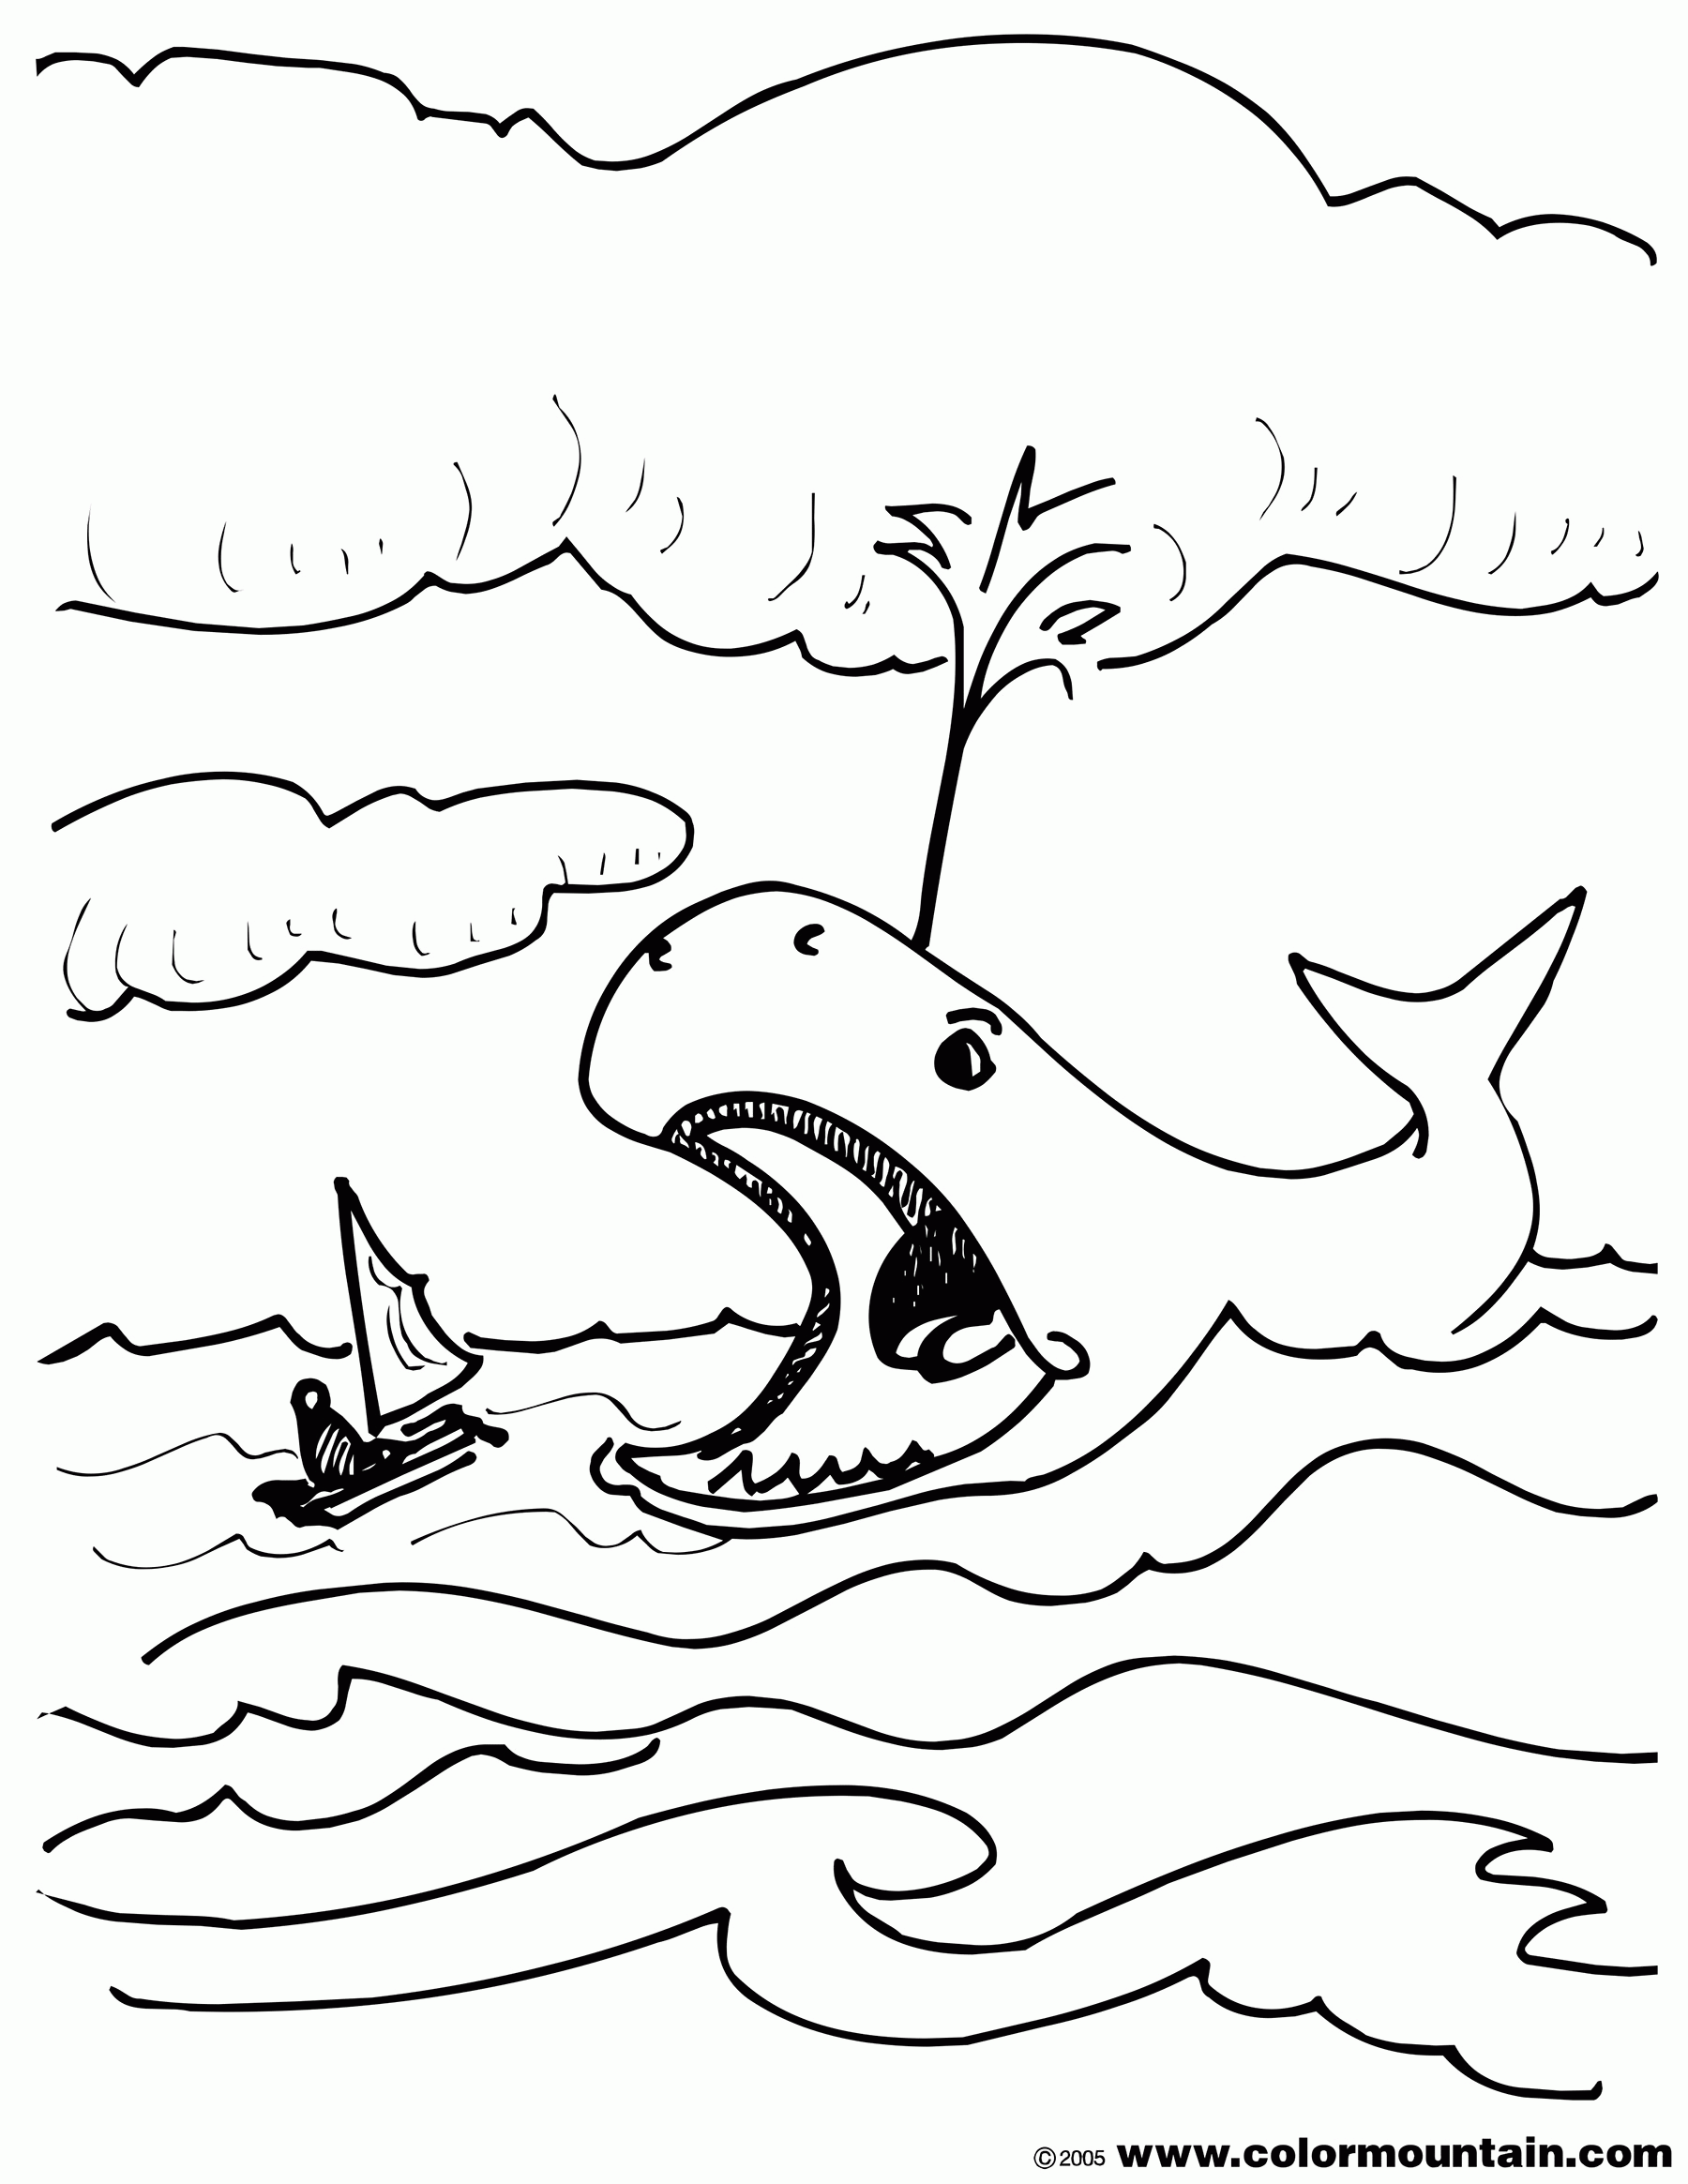 Jonah and the Whale Coloring Sheet - Create A Printout Or Activity